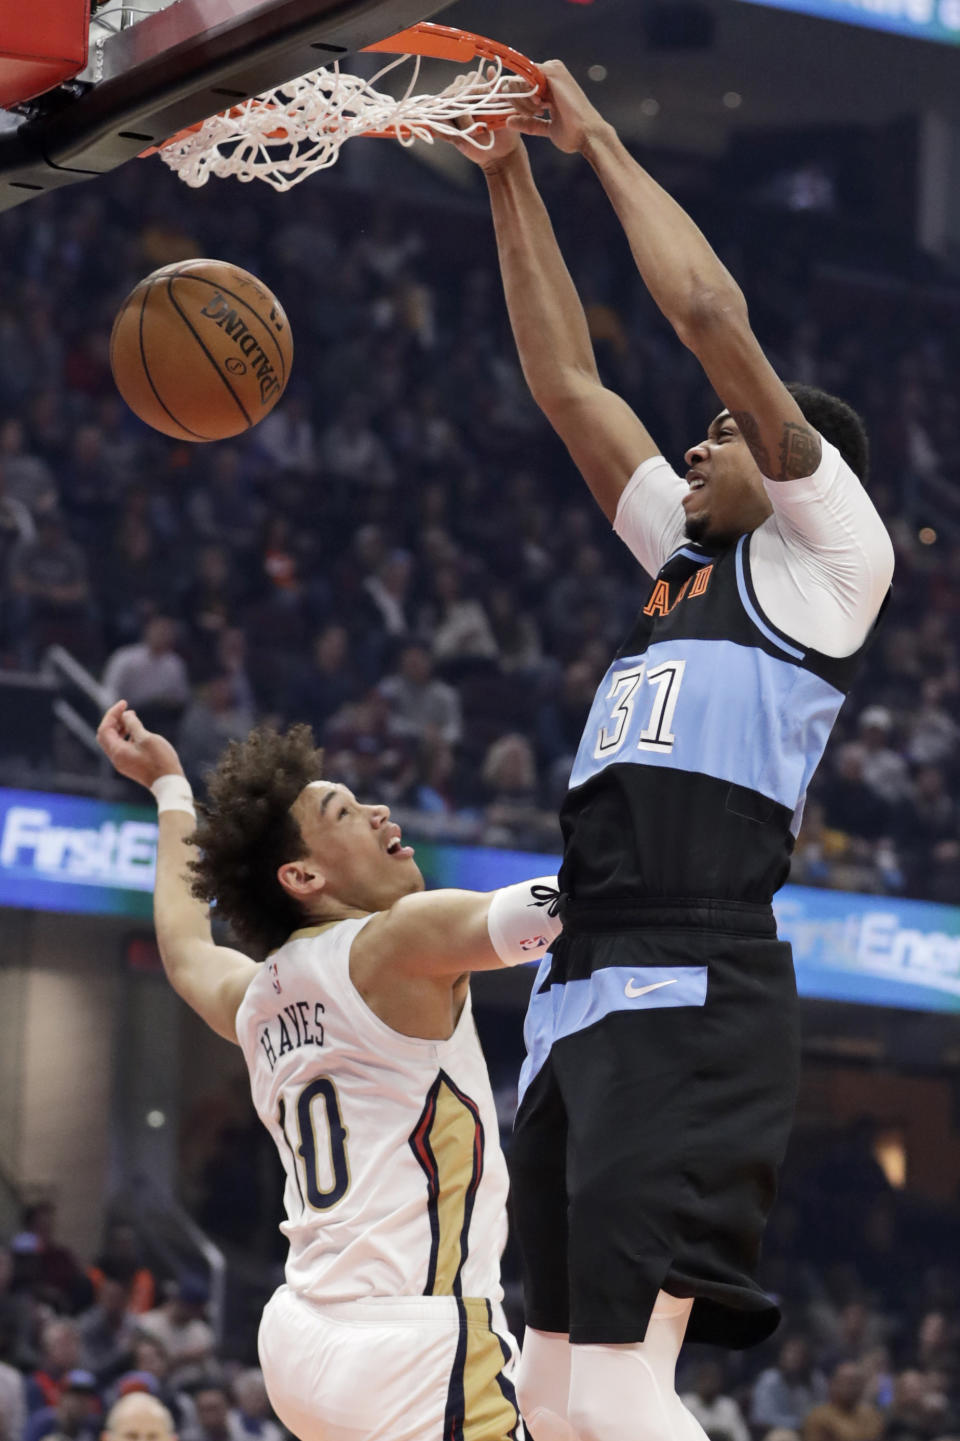 Cleveland Cavaliers' John Henson (31) dunks next to New Orleans Pelicans' Jaxson Hayes (10) during the first half of an NBA basketball game Tuesday, Jan. 28, 2020, in Cleveland. (AP Photo/Tony Dejak)